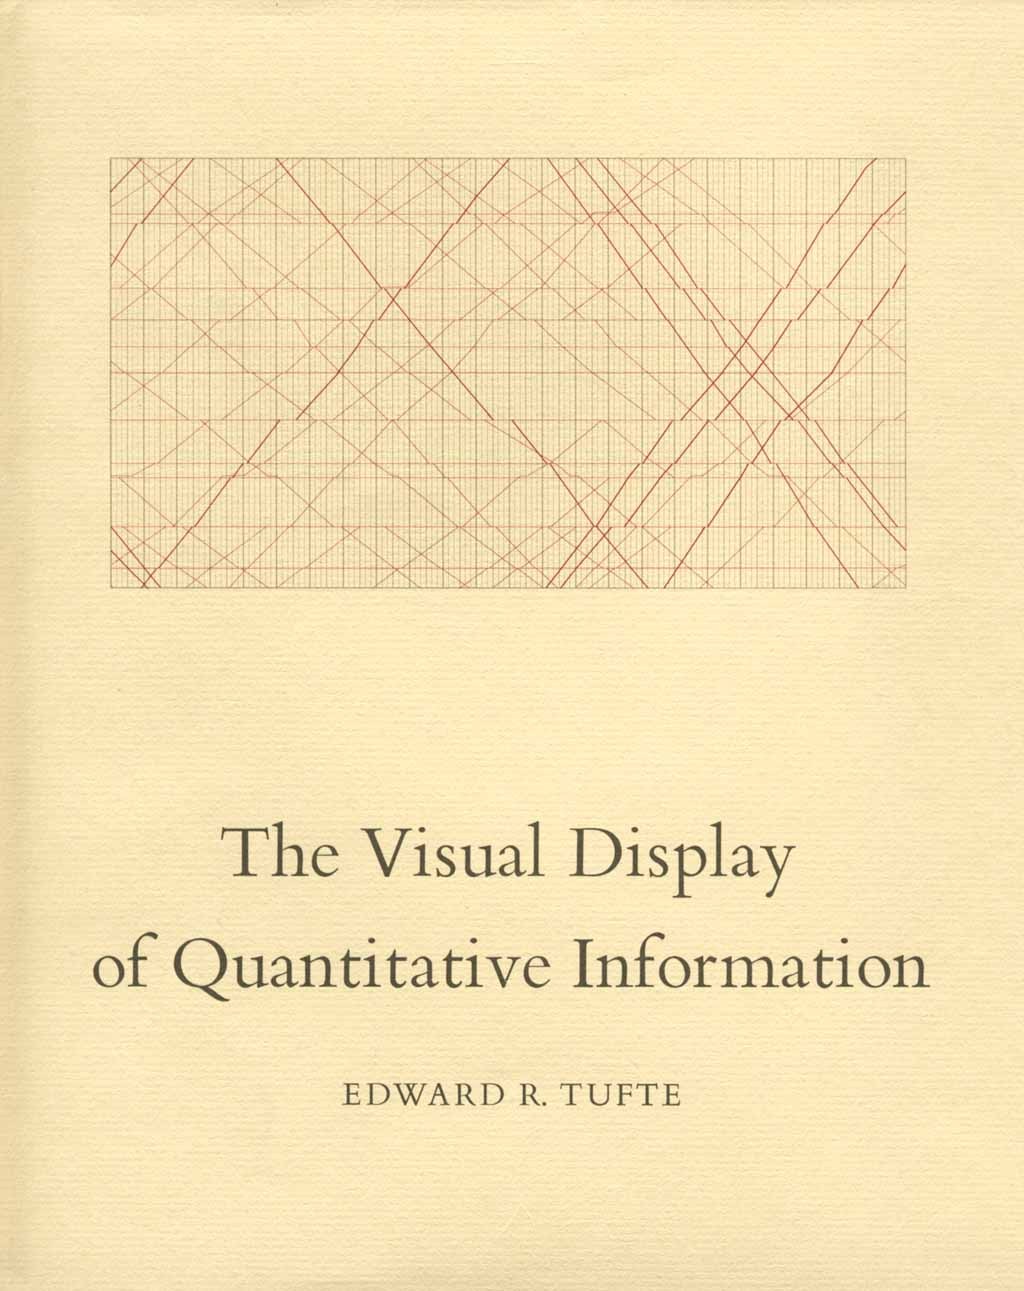 an image of the cover of The Visual Display of Quantitative Information by Edward Tufte